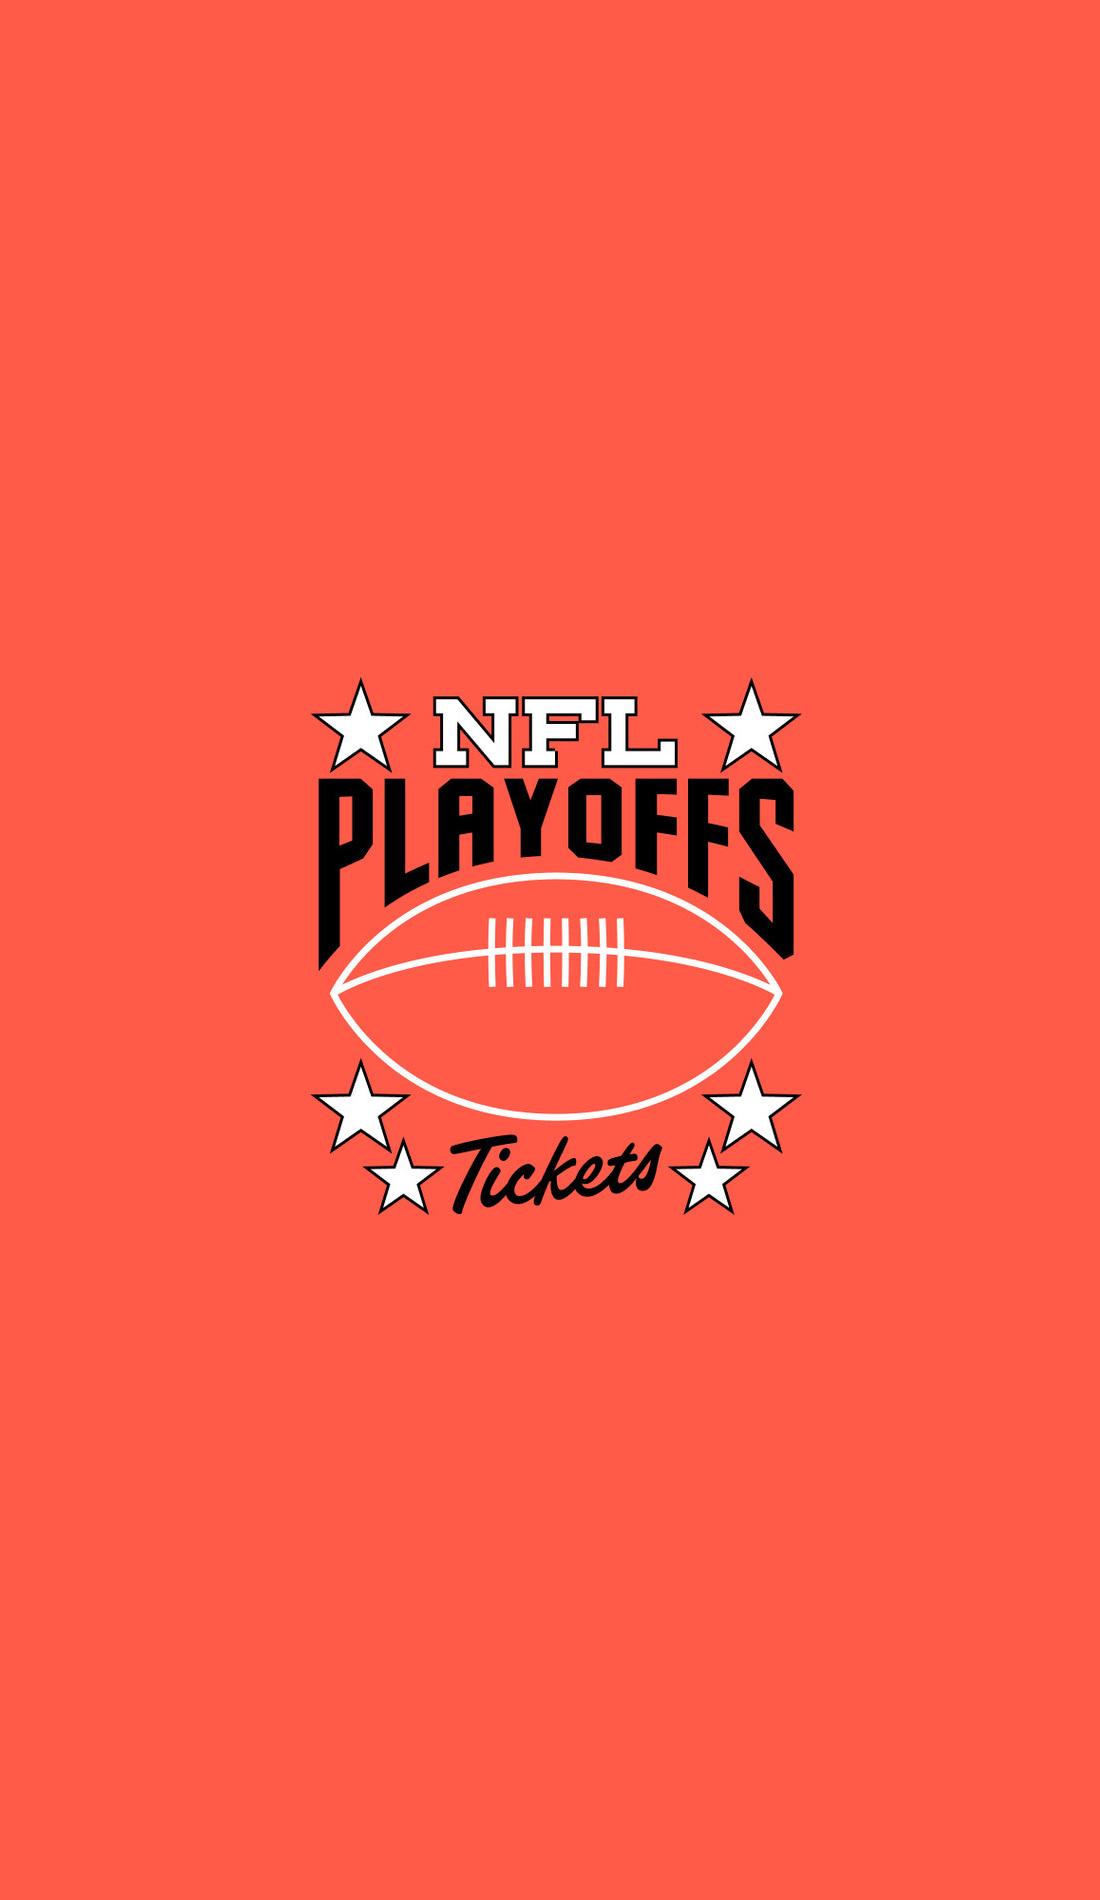 Cardinals playoff tickets to go on sale Friday